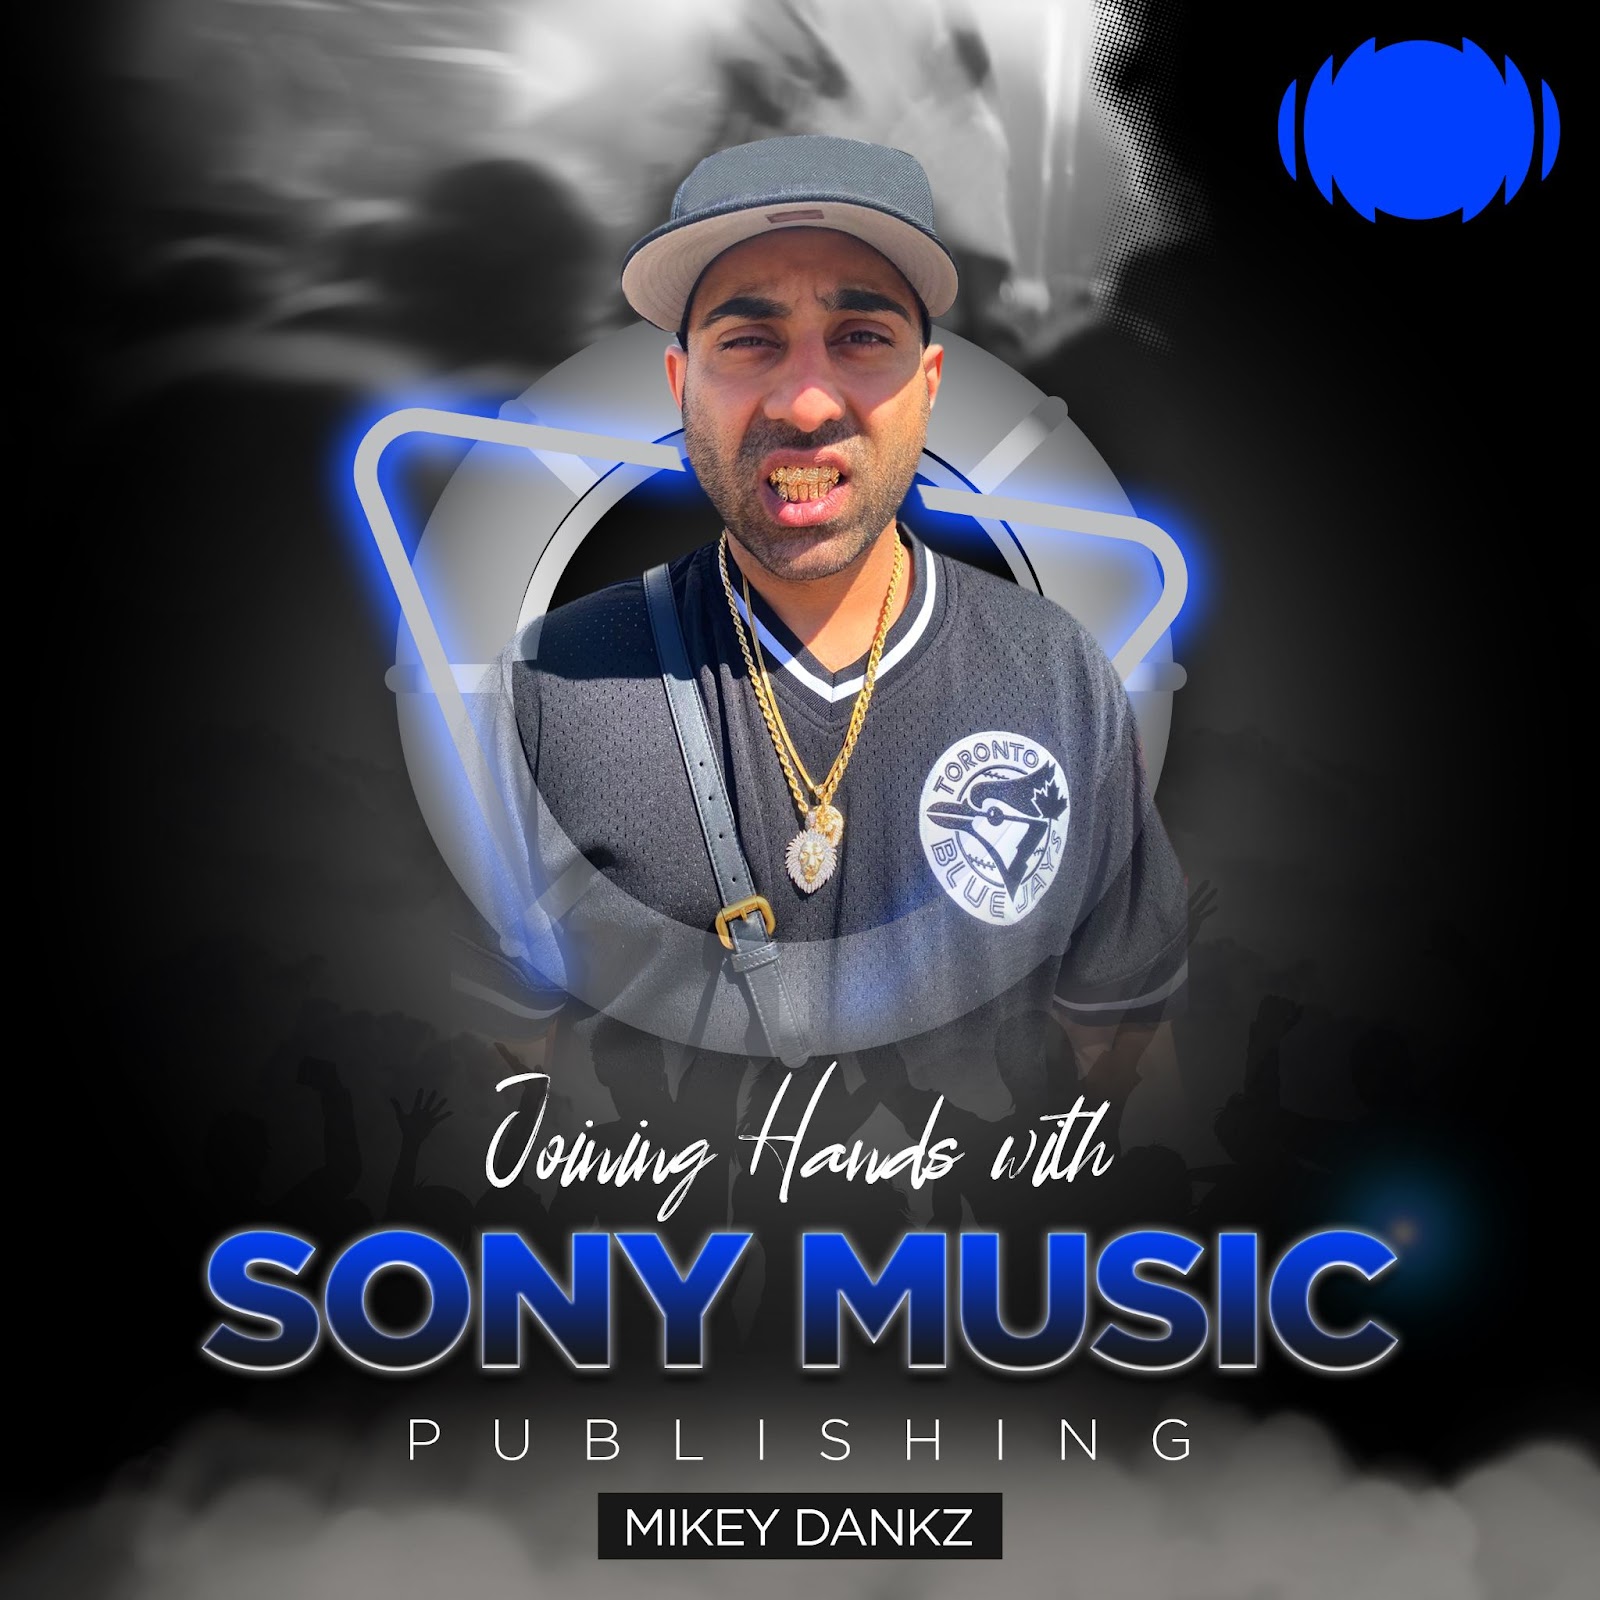 Mikey Dankz is joining hands with Sony Music Publishing 